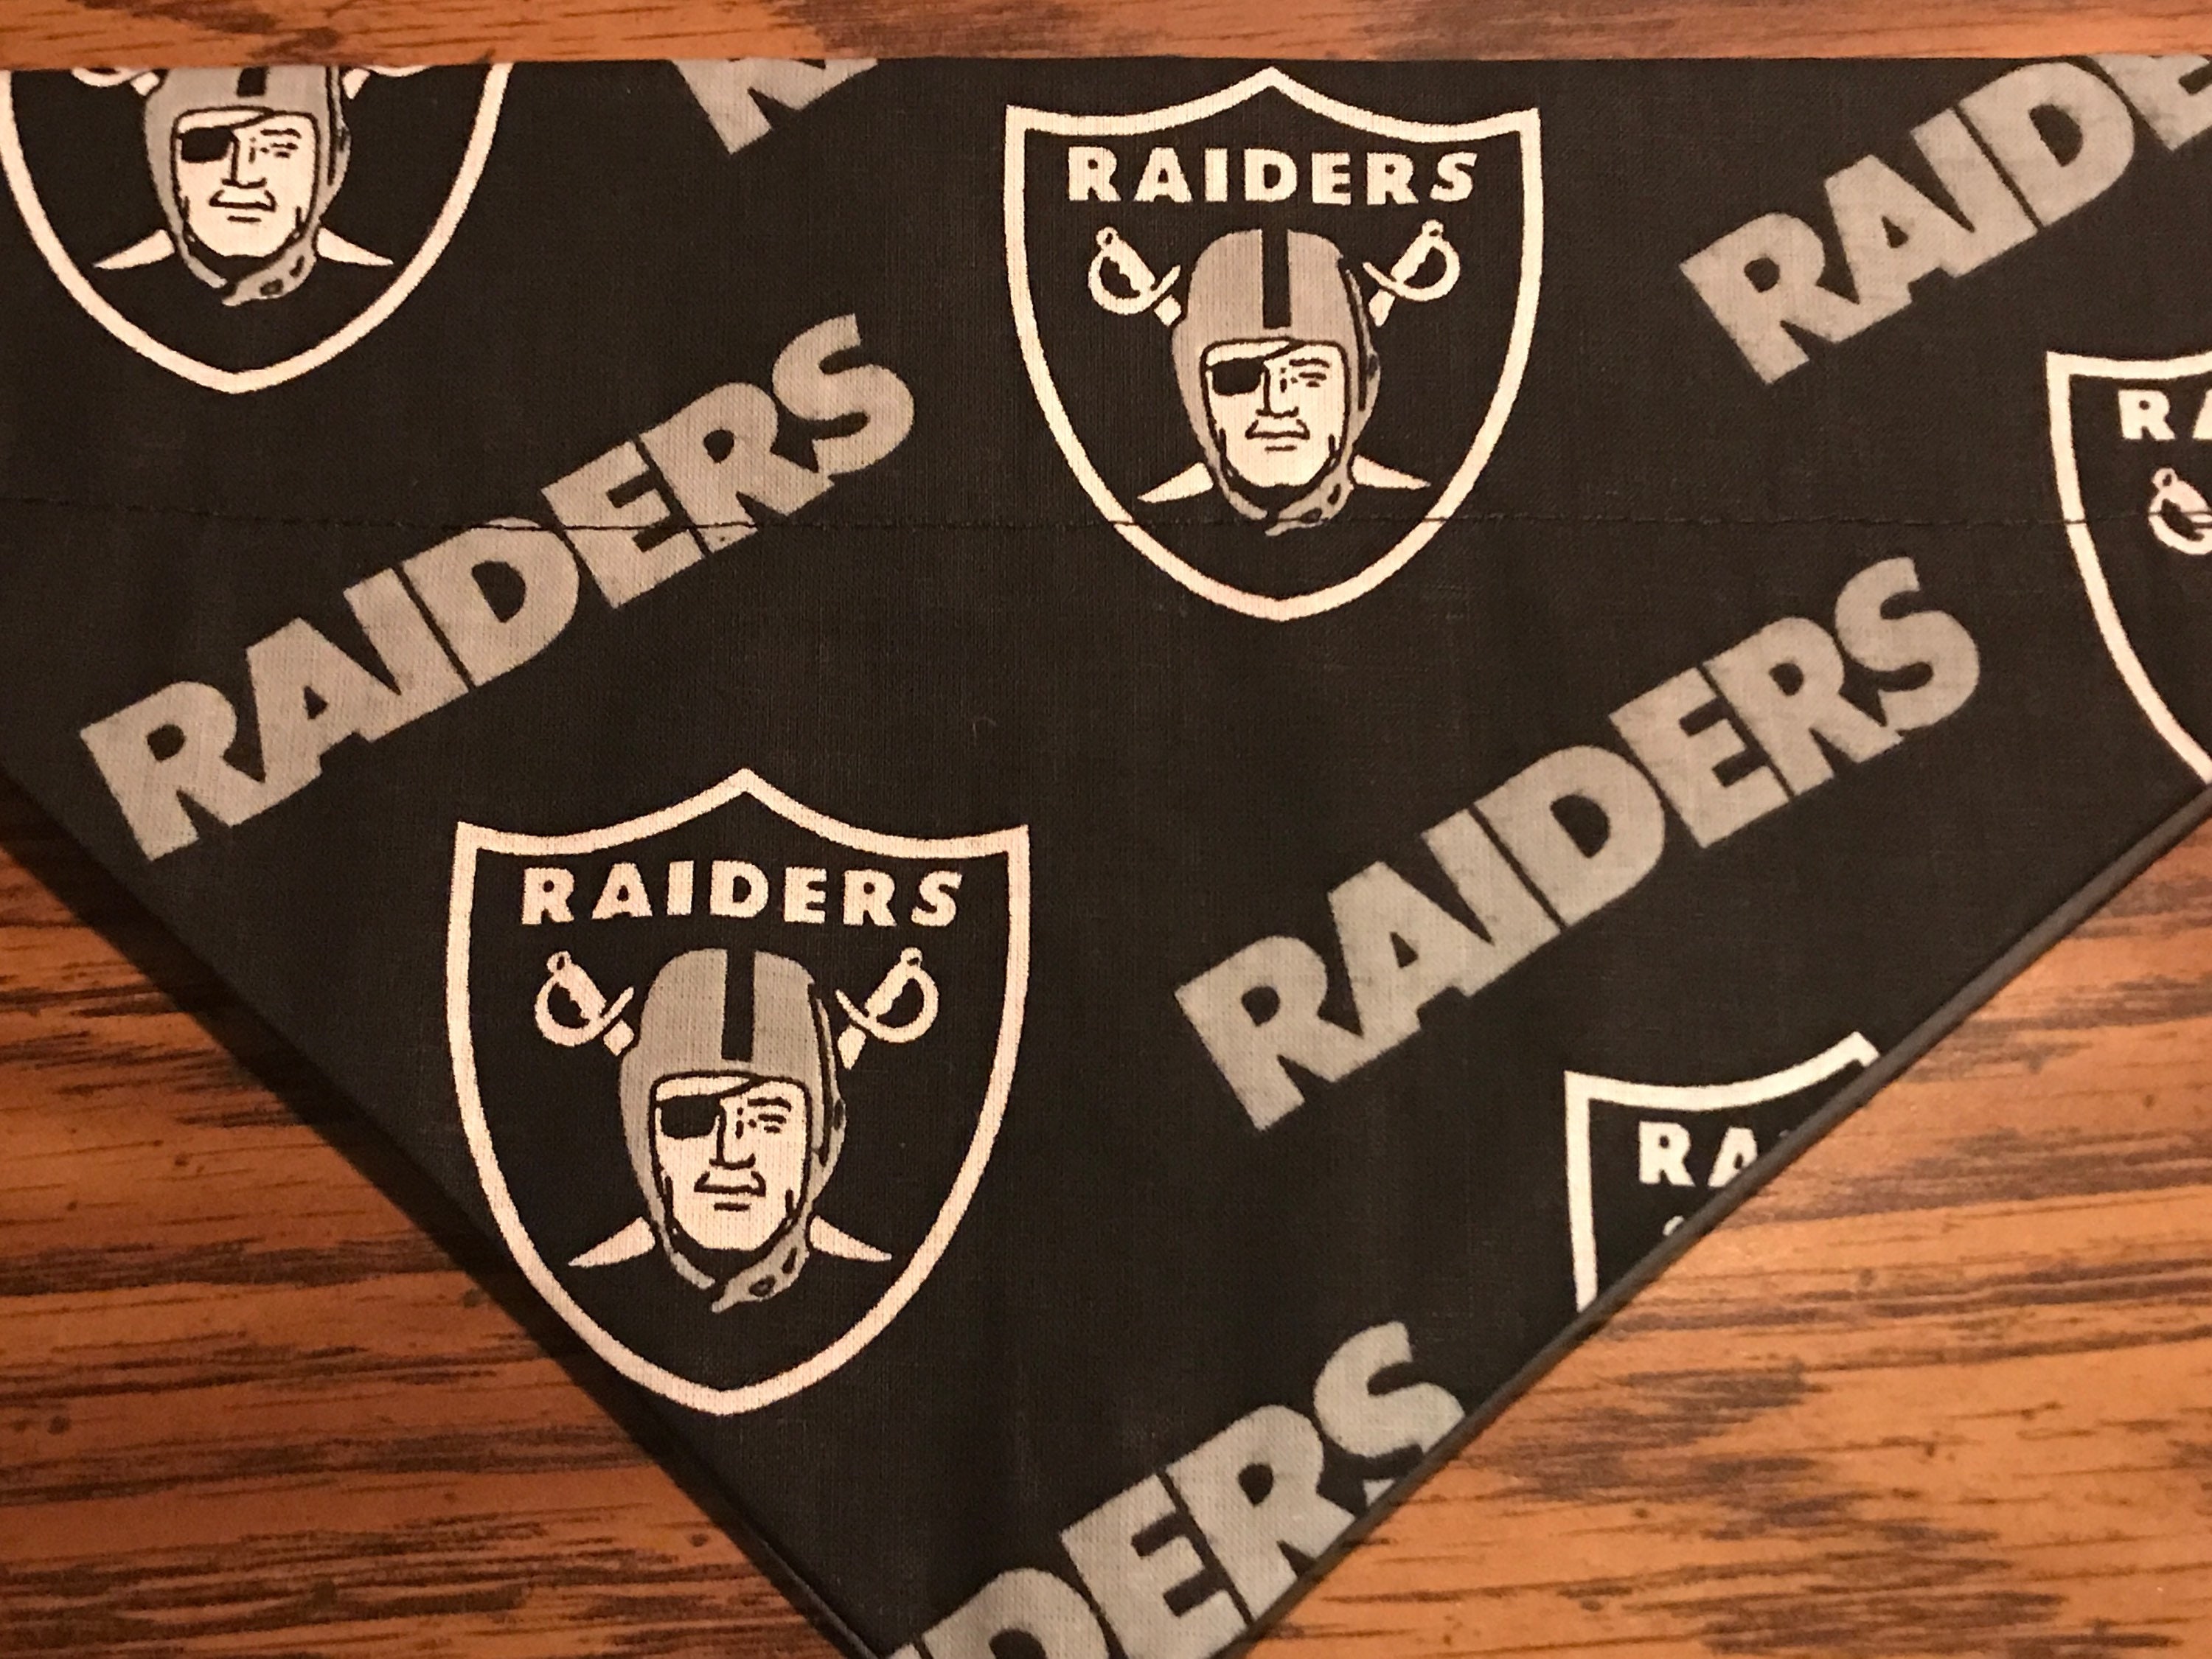 raiders jersey outfit with bandanna｜TikTok Search